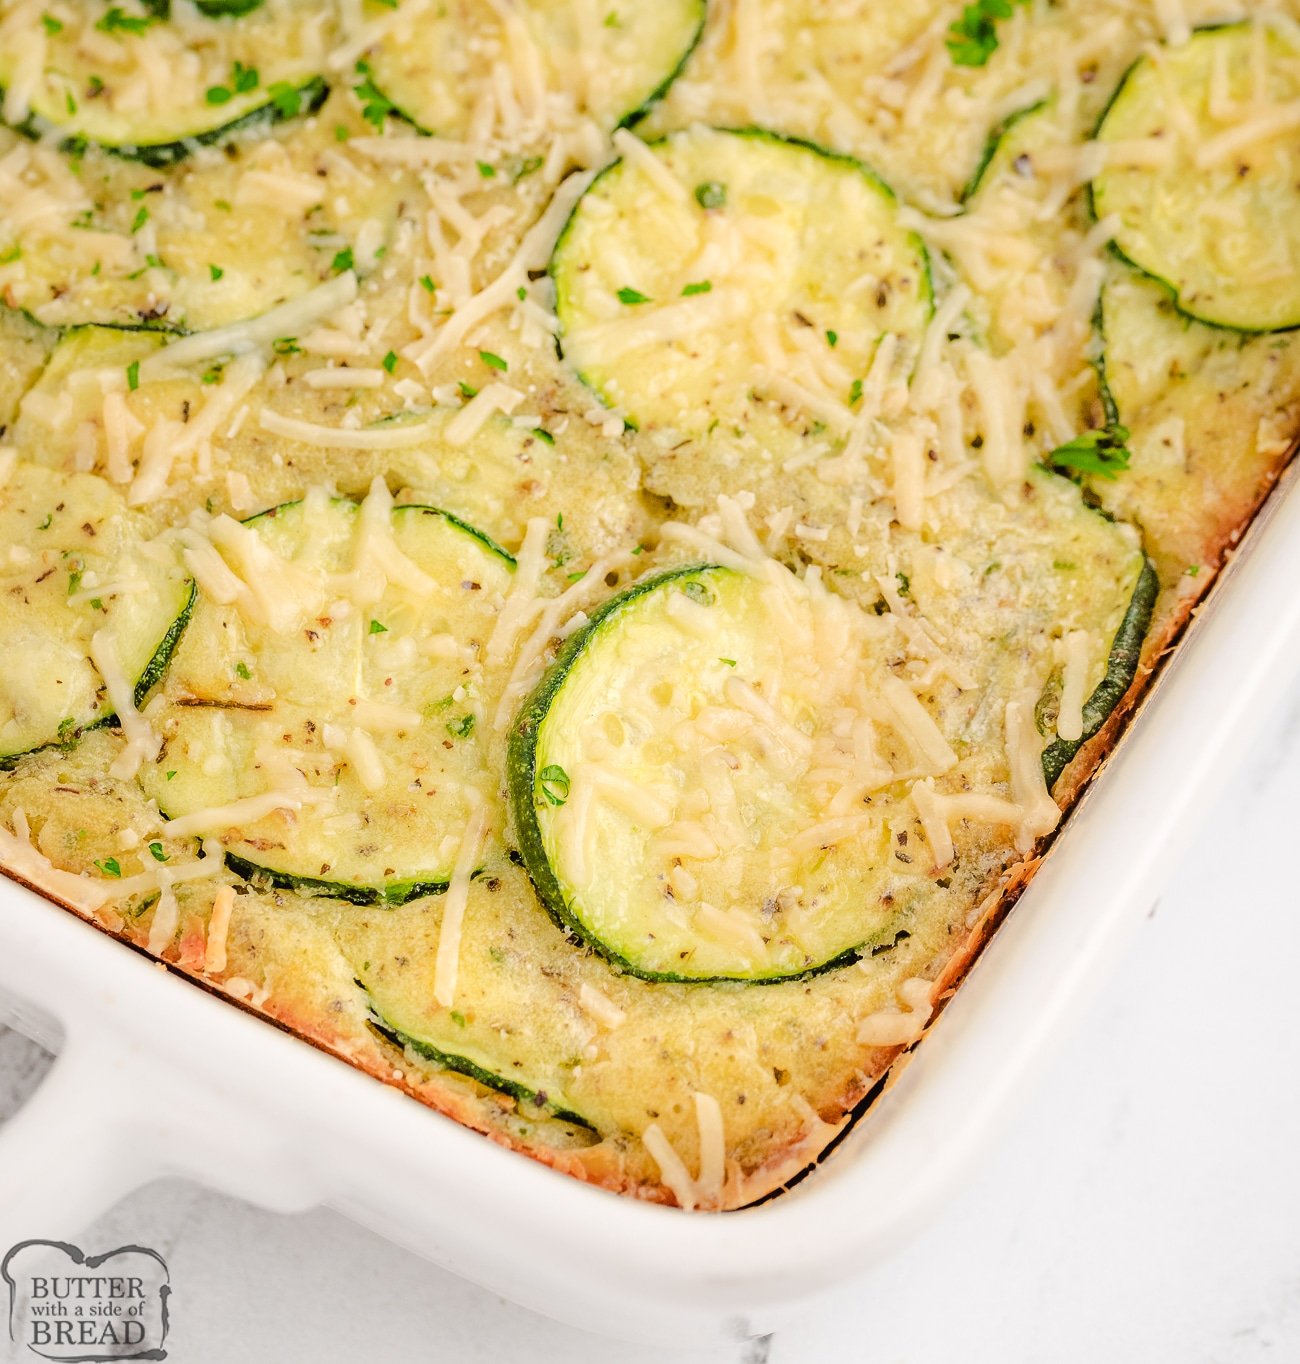 baked zucchini Parmesan casserole in a white baking dish